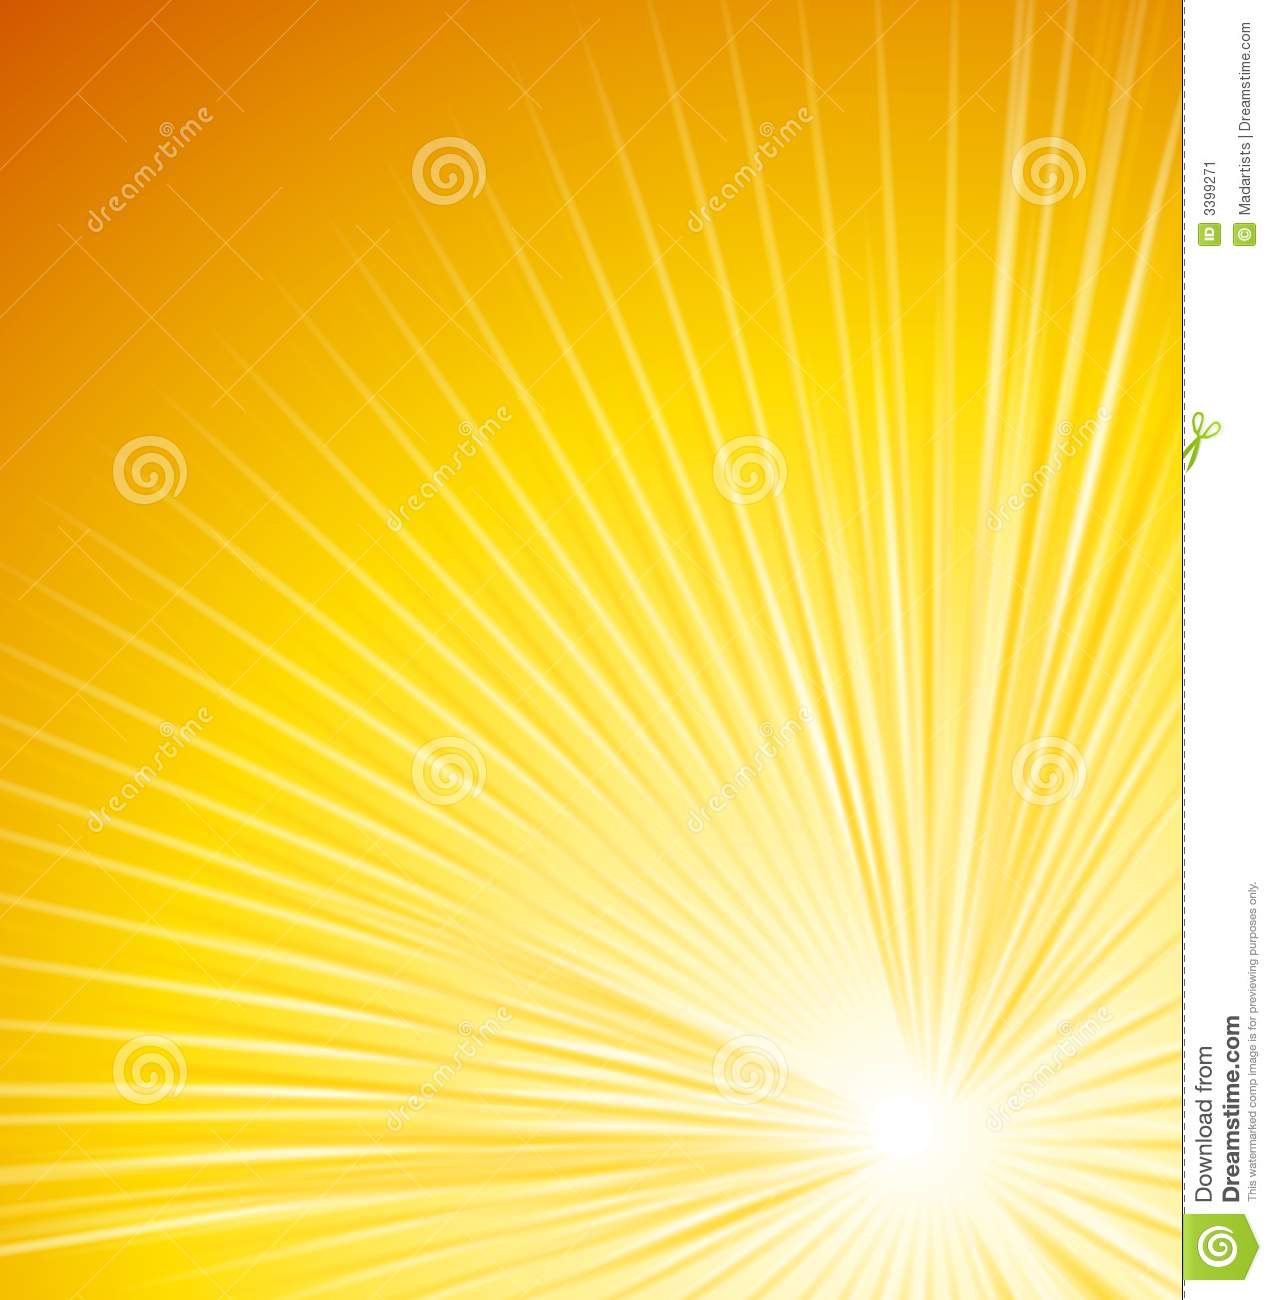 Ray Of Light Clipart Rays Of Light Glowing Lines 2